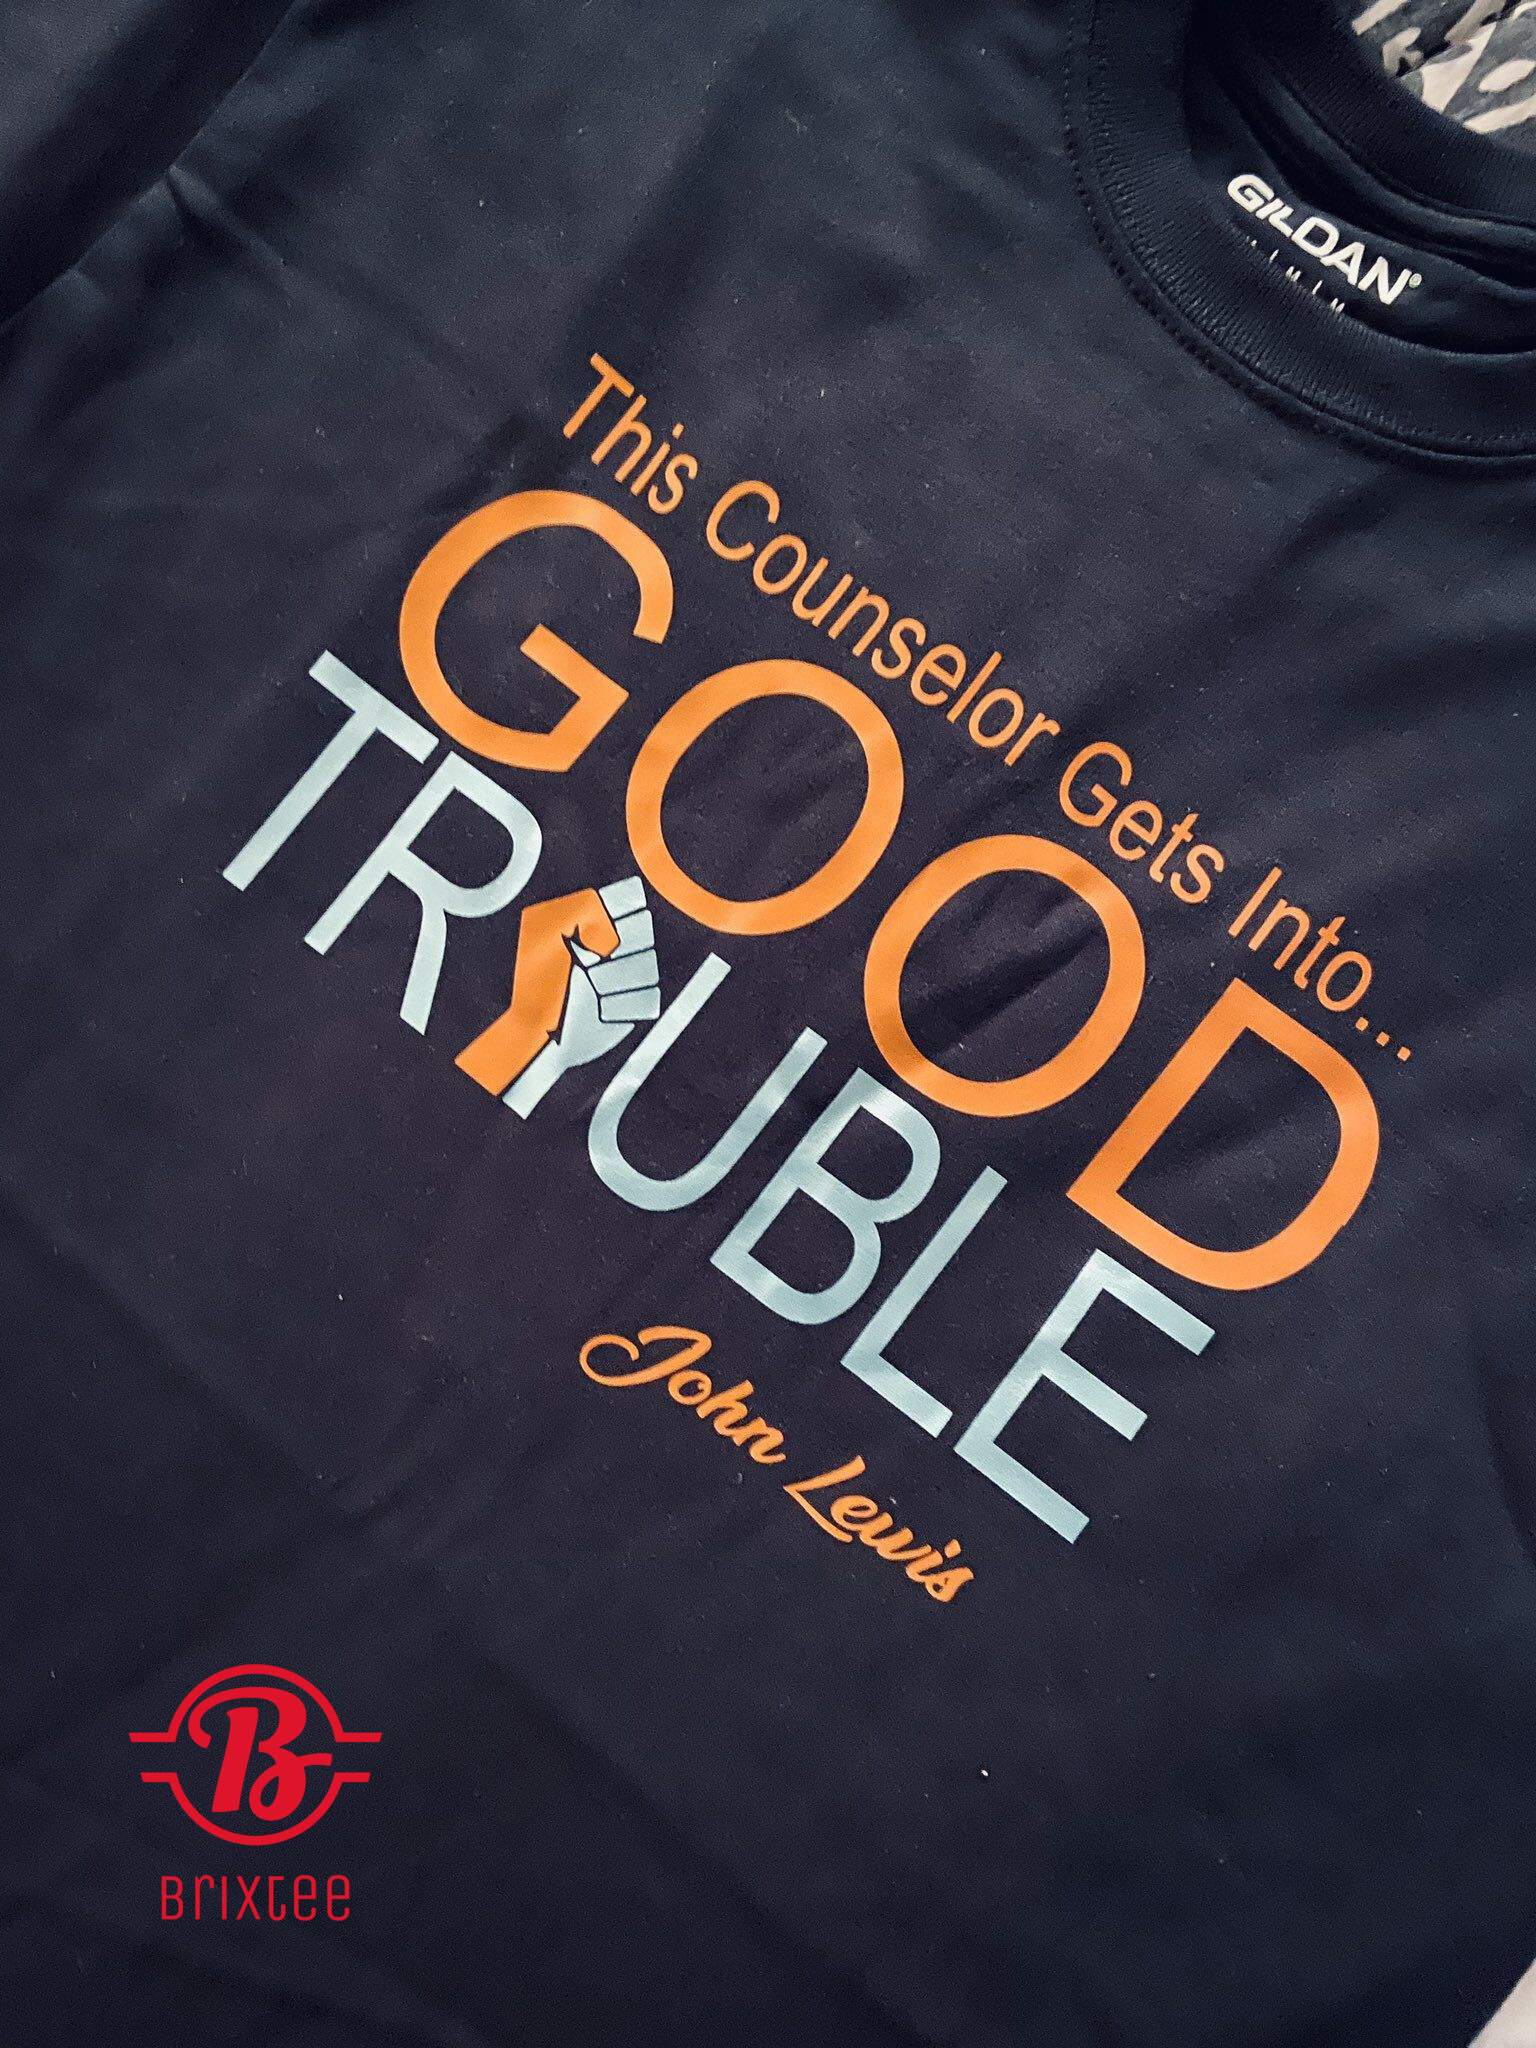 This Counselor Gets Into... Good Trouble T-Shirt